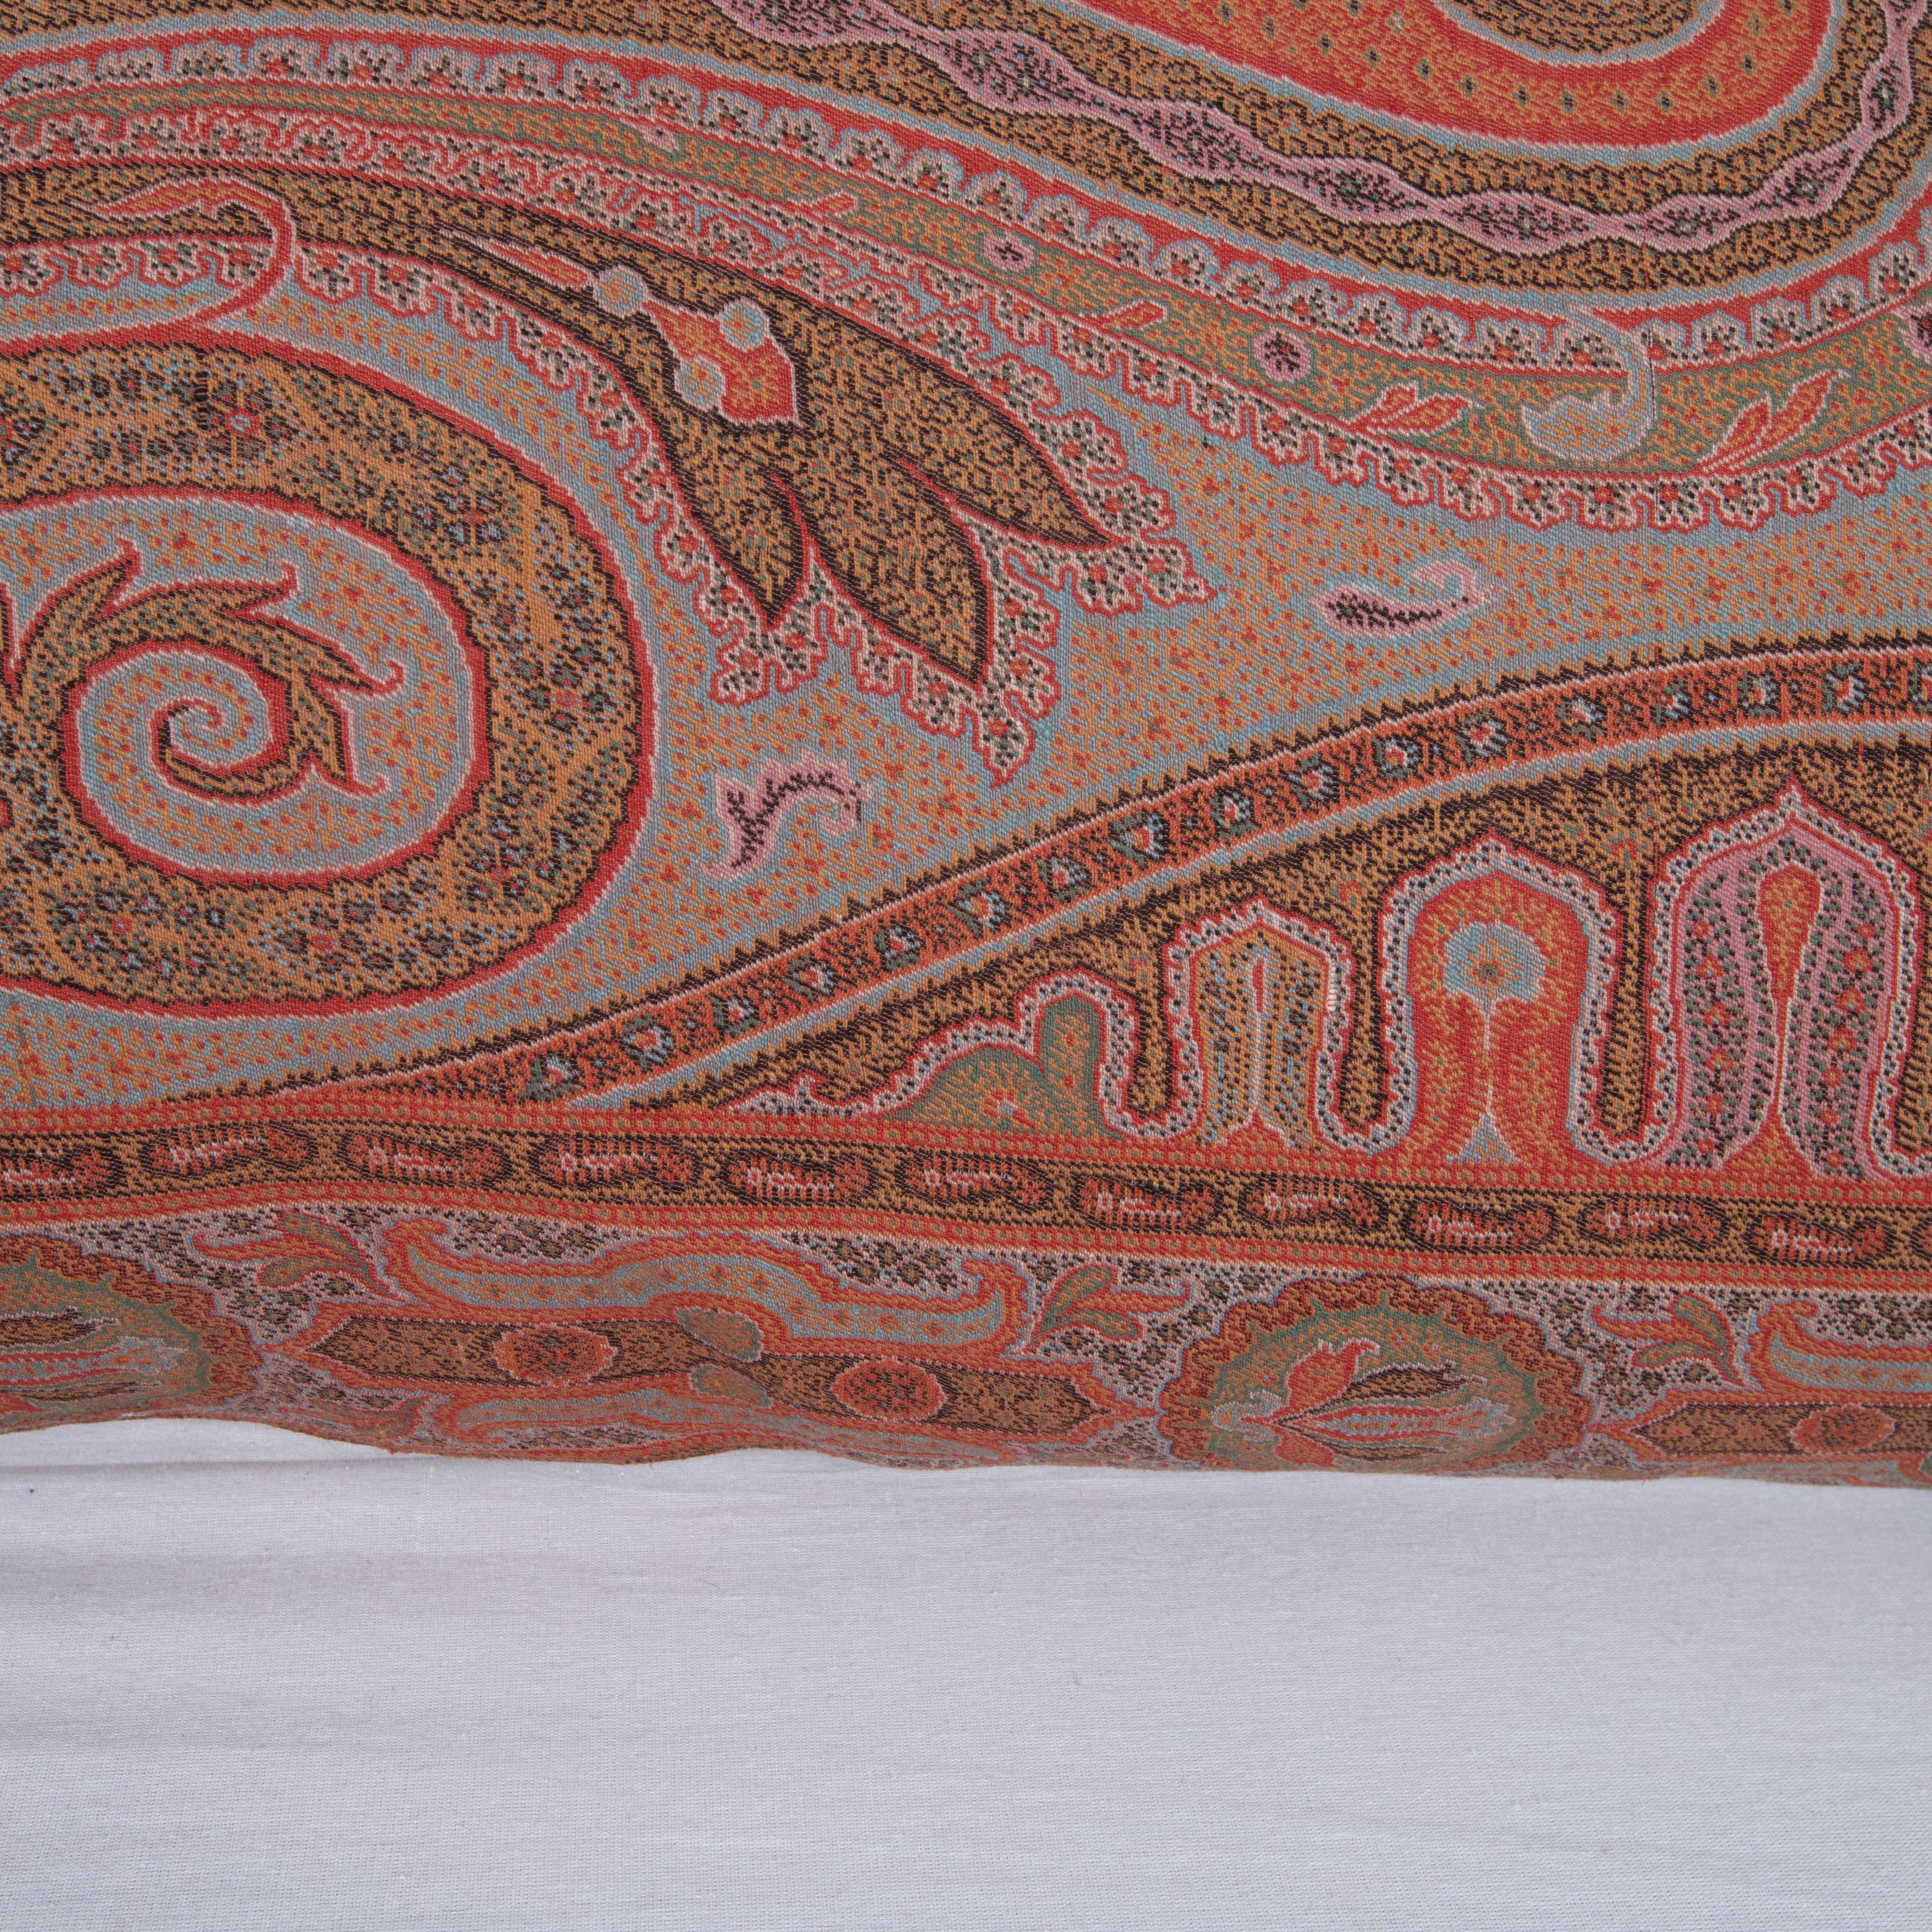 Woven Antique Pillow Cover Made from a European Wool Paisley Shawl, L 19th/ E.20th C For Sale